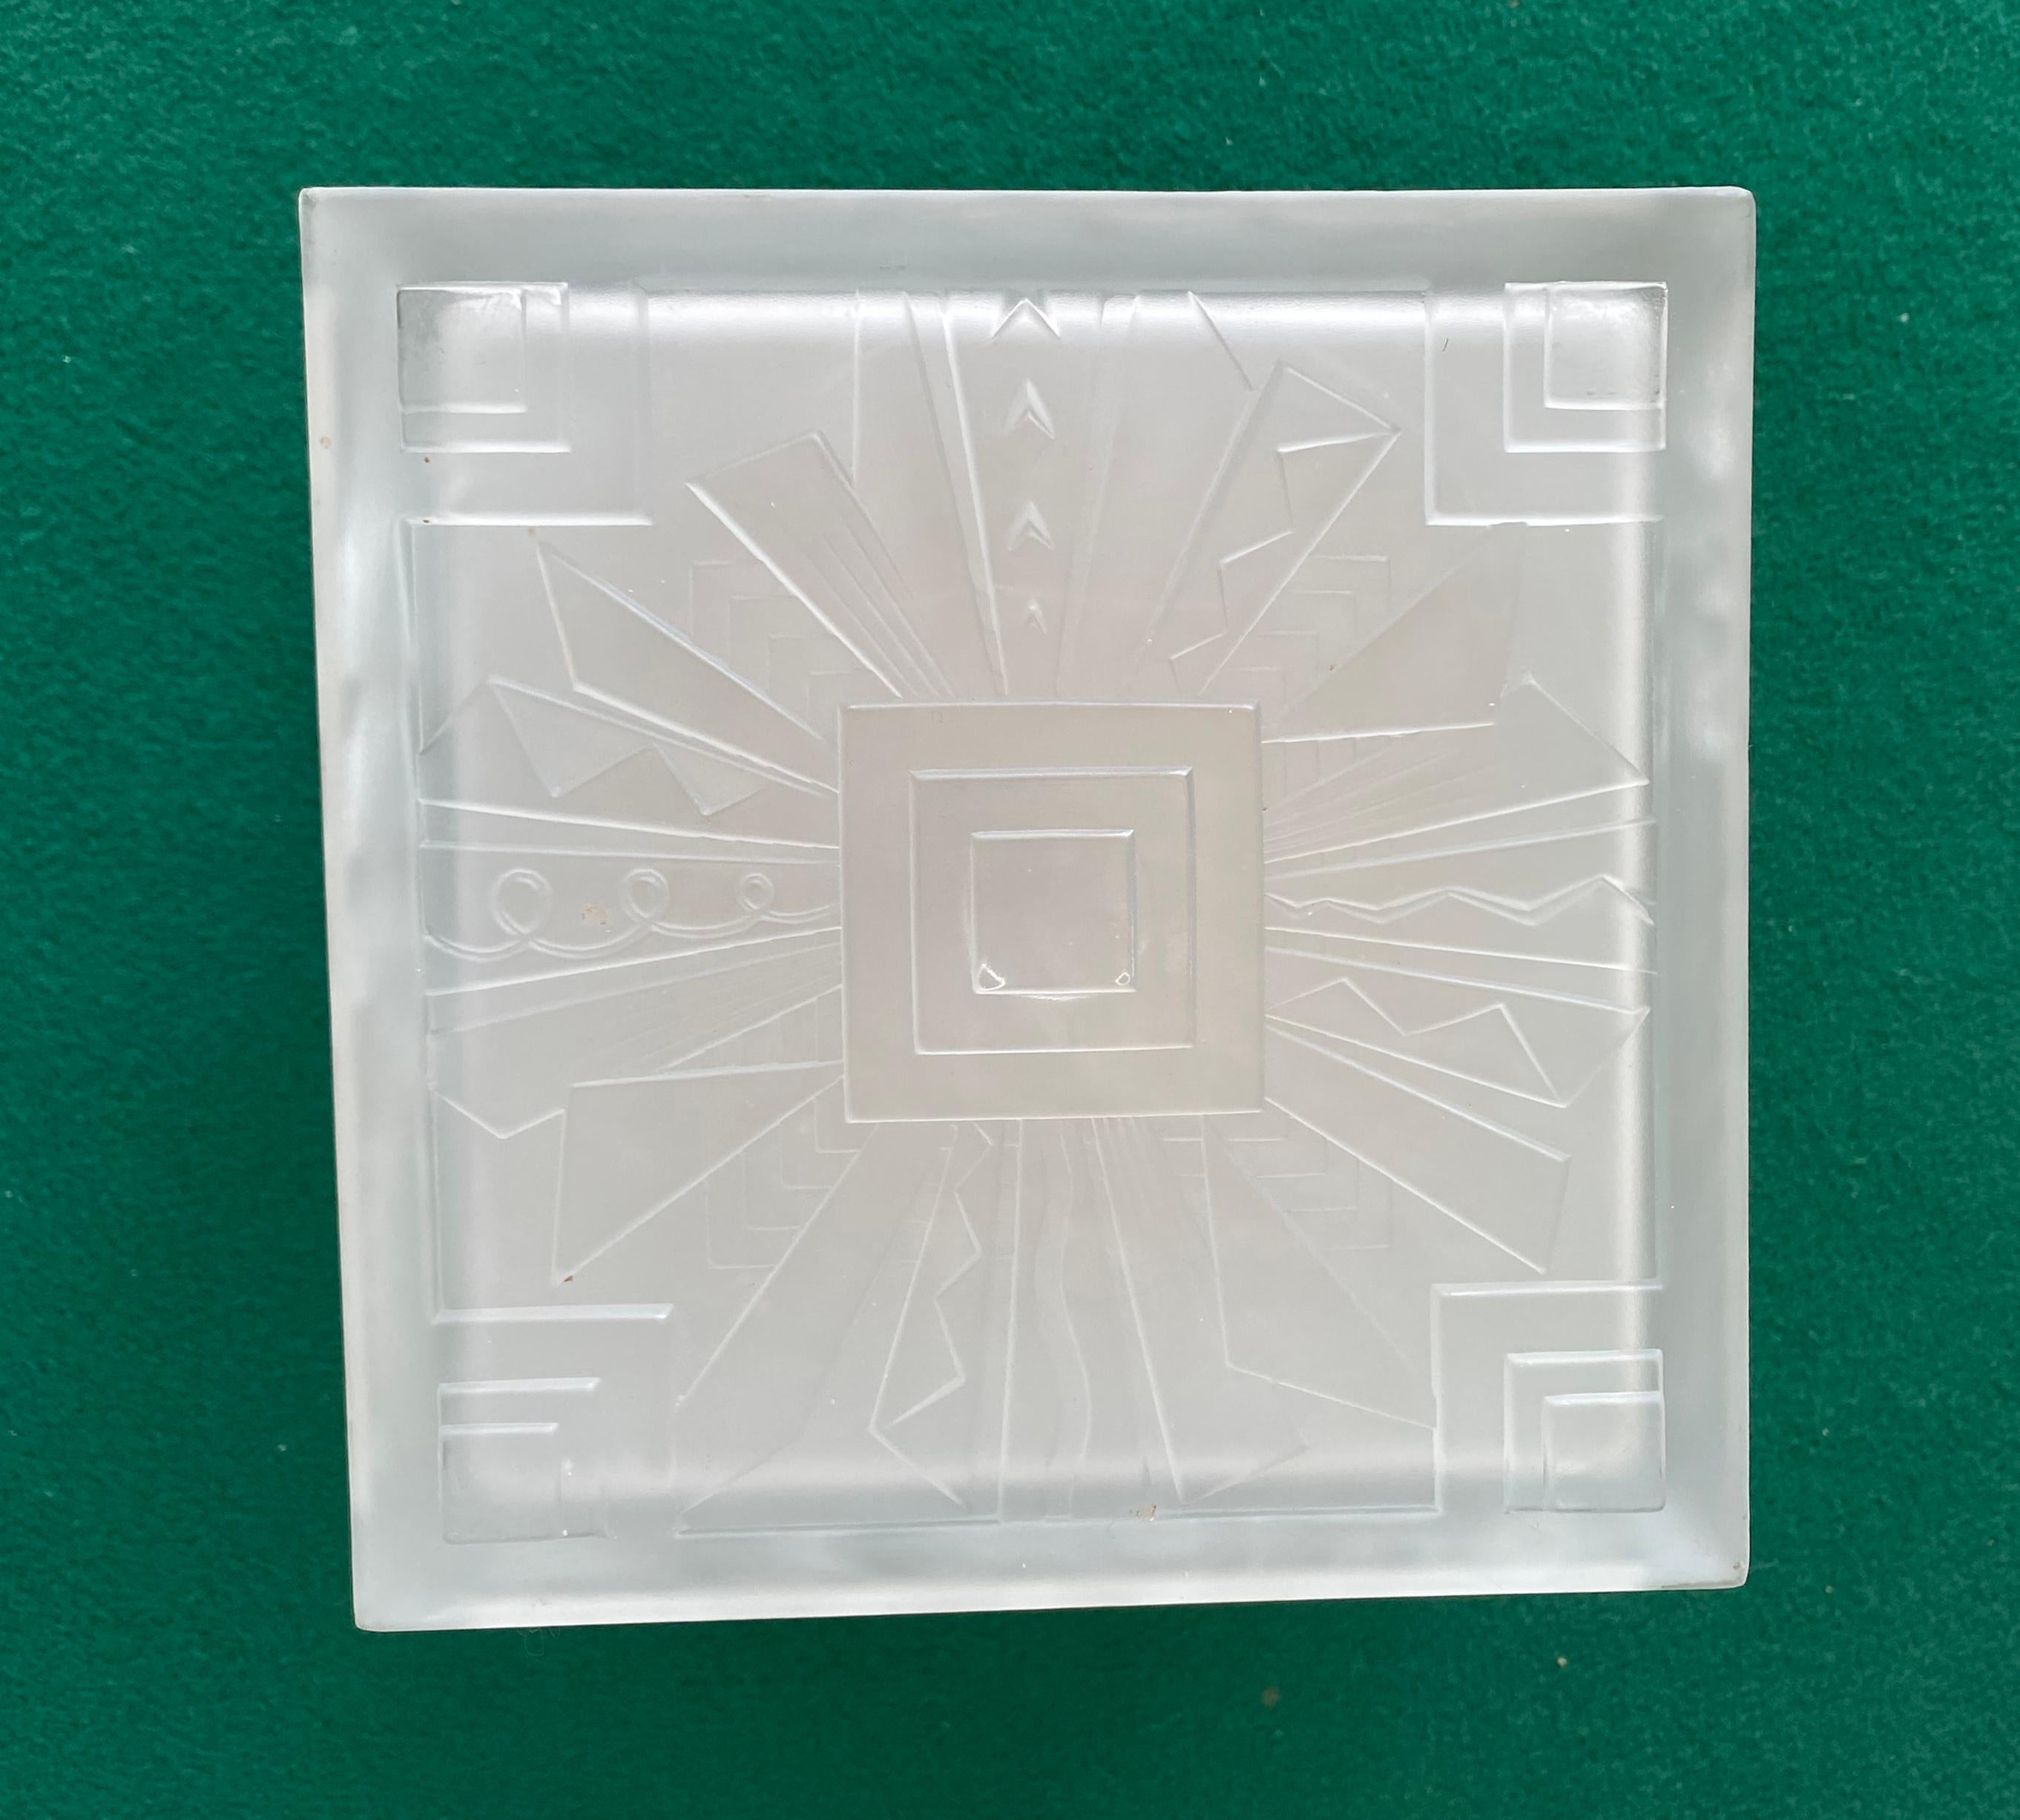 French Art Deco fixture, unmarked, probably by Sabino, in frosted glass and satin nickel brass frame, electrified. In very good condition, ready to be installed on the ceiling.